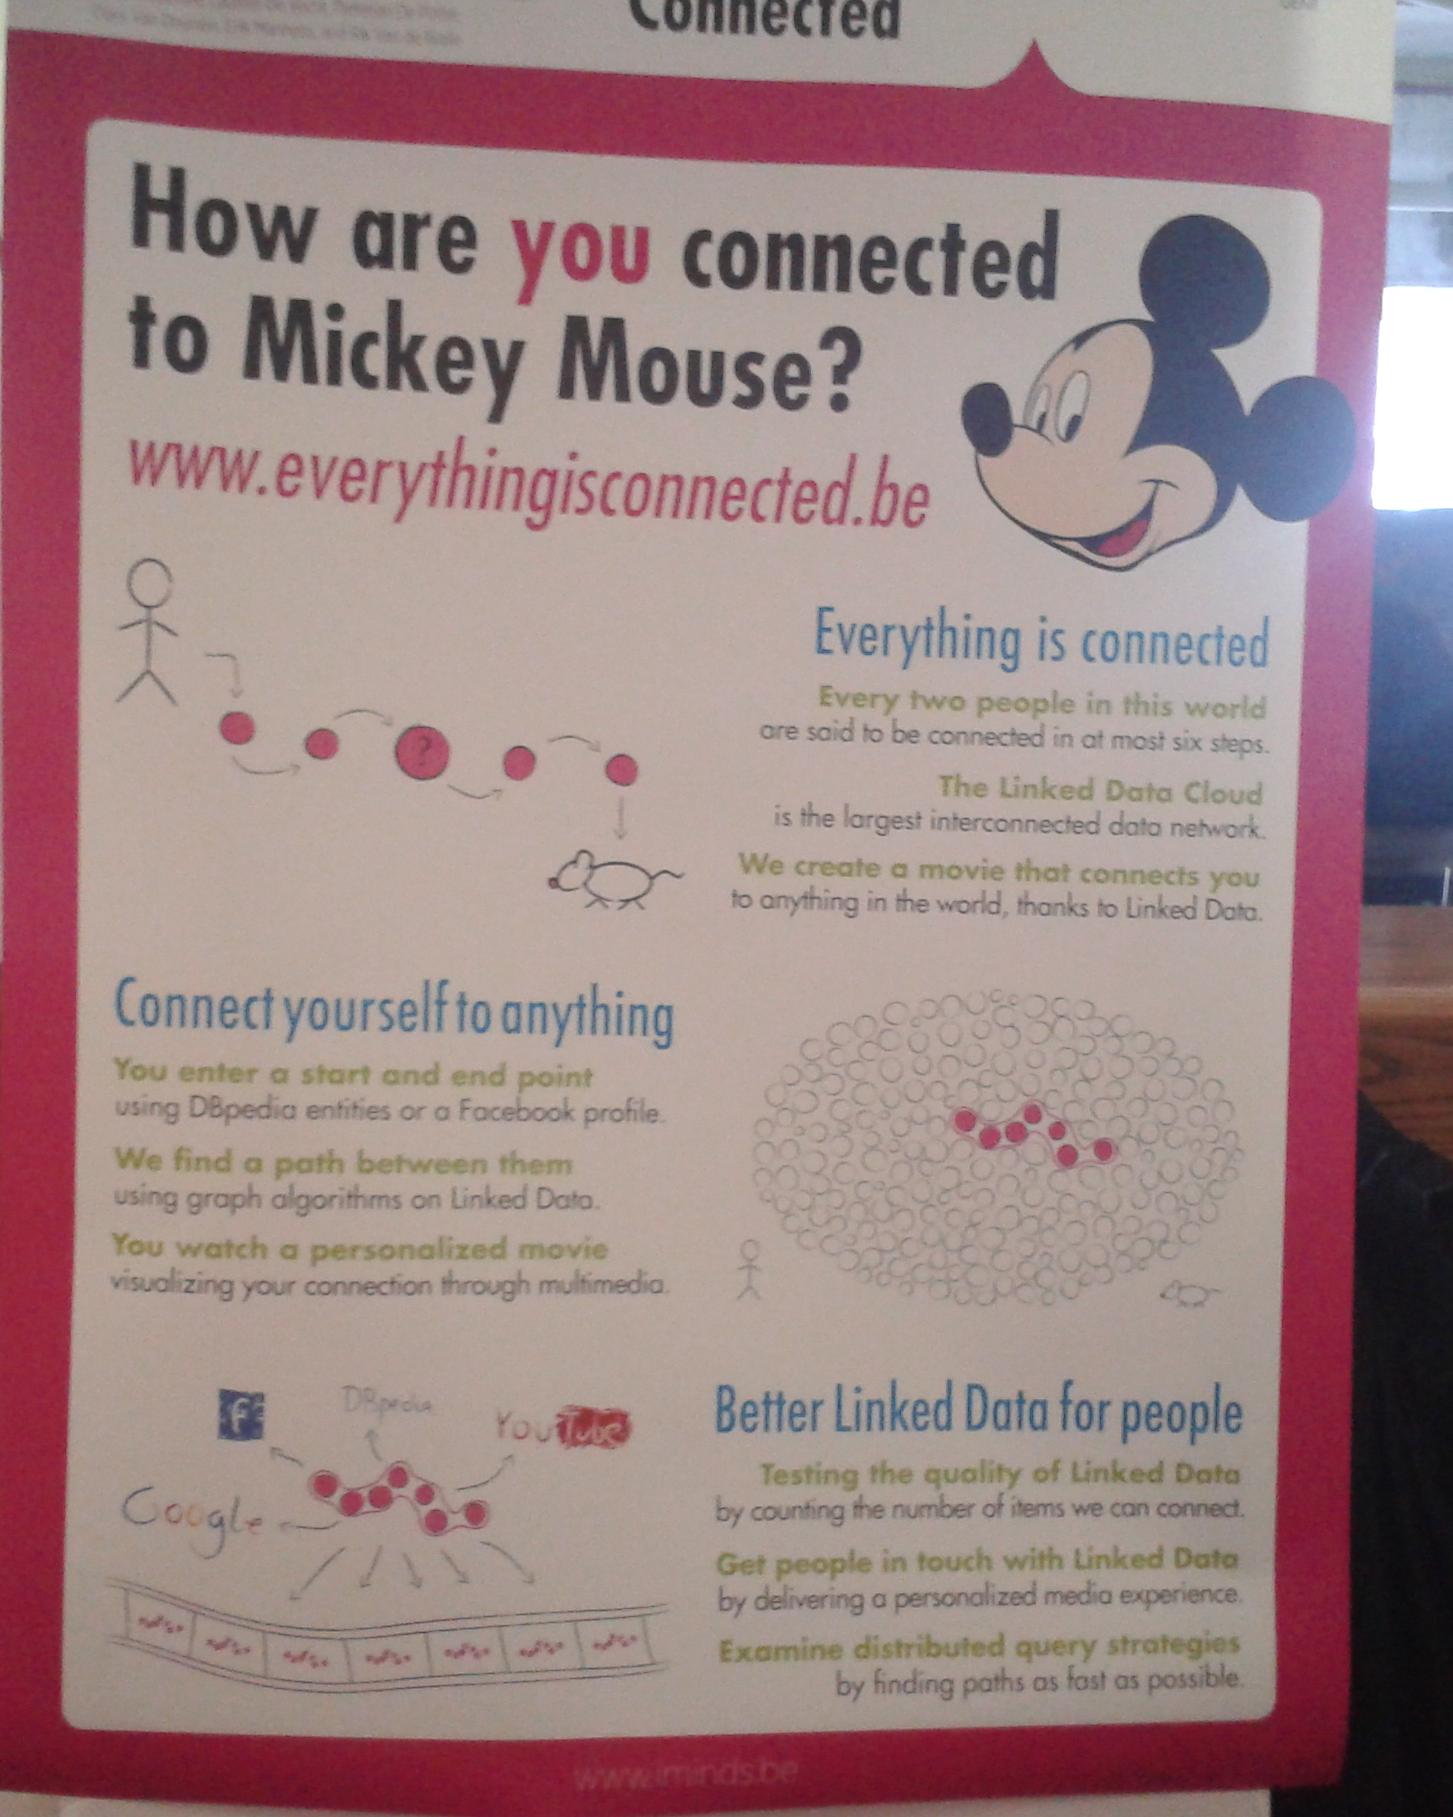 www.everythingsconnected.be